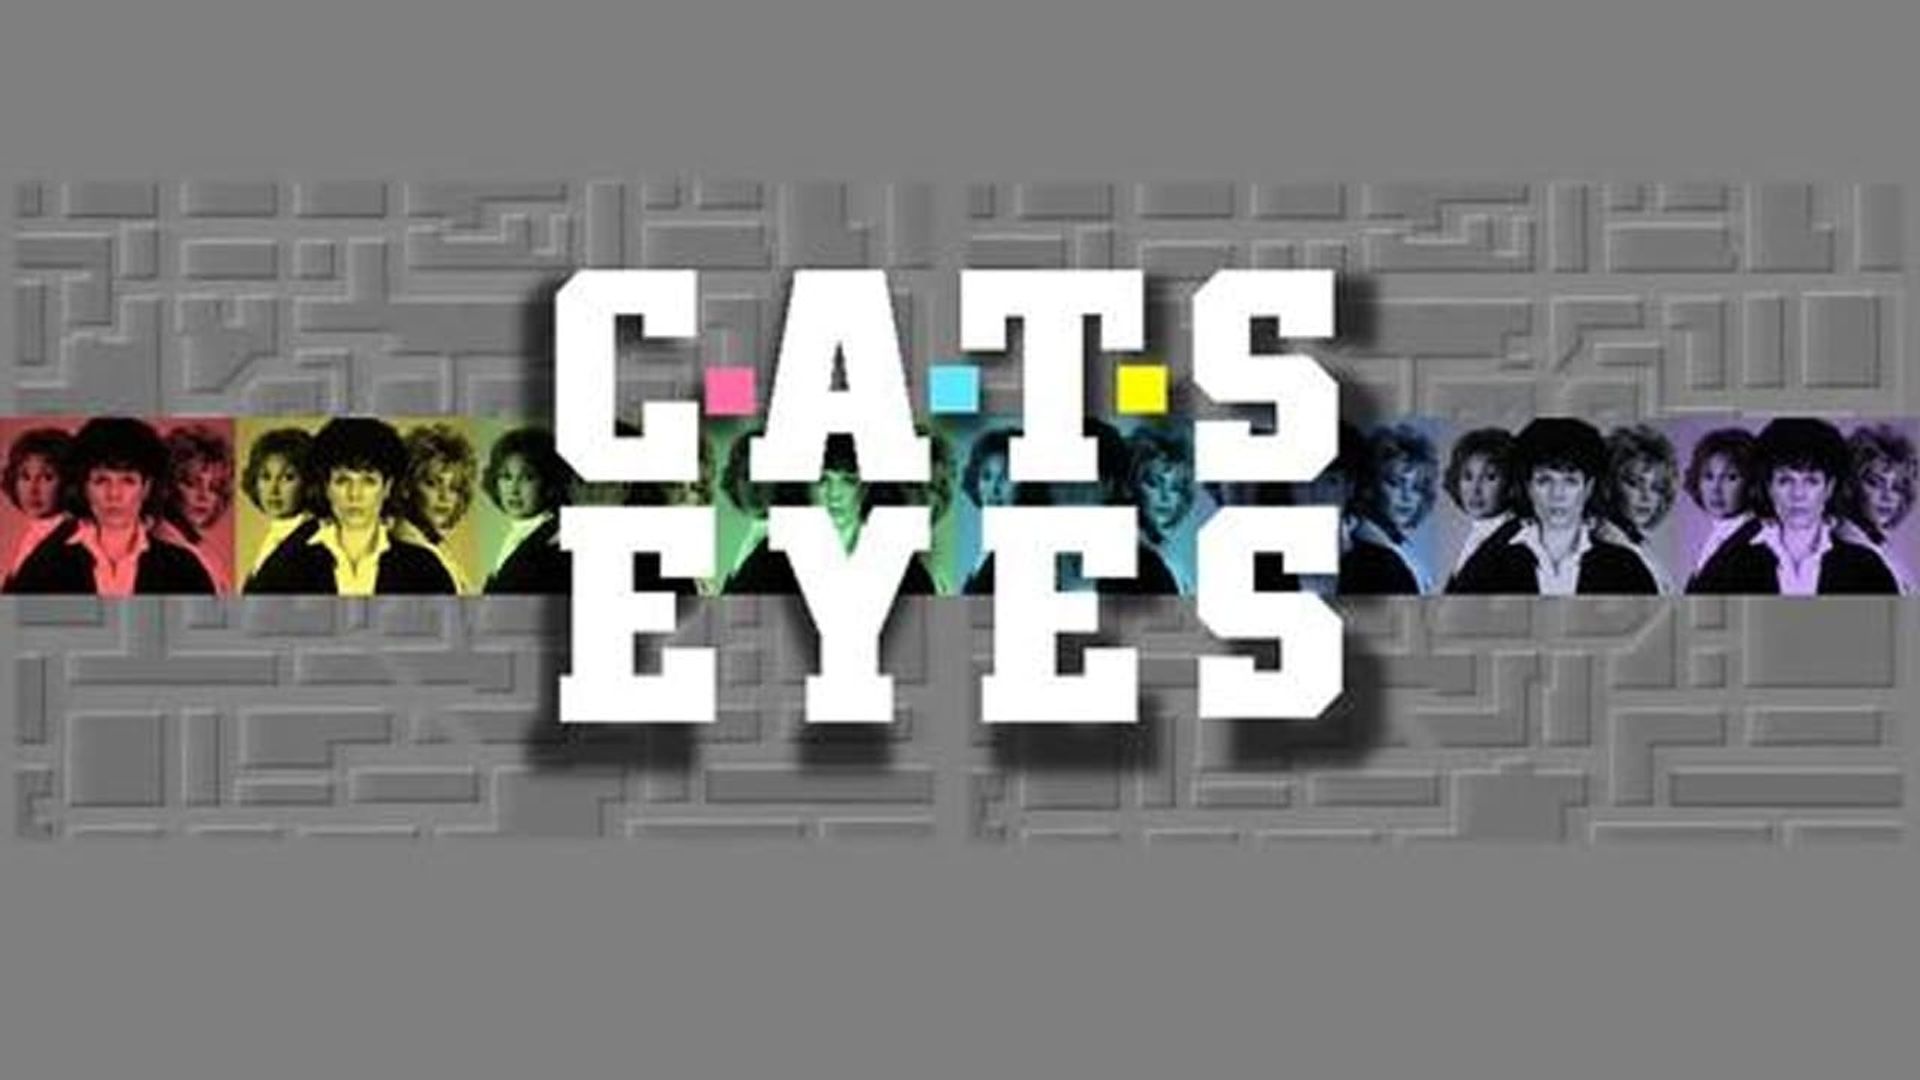 C.A.T.S. Eyes background